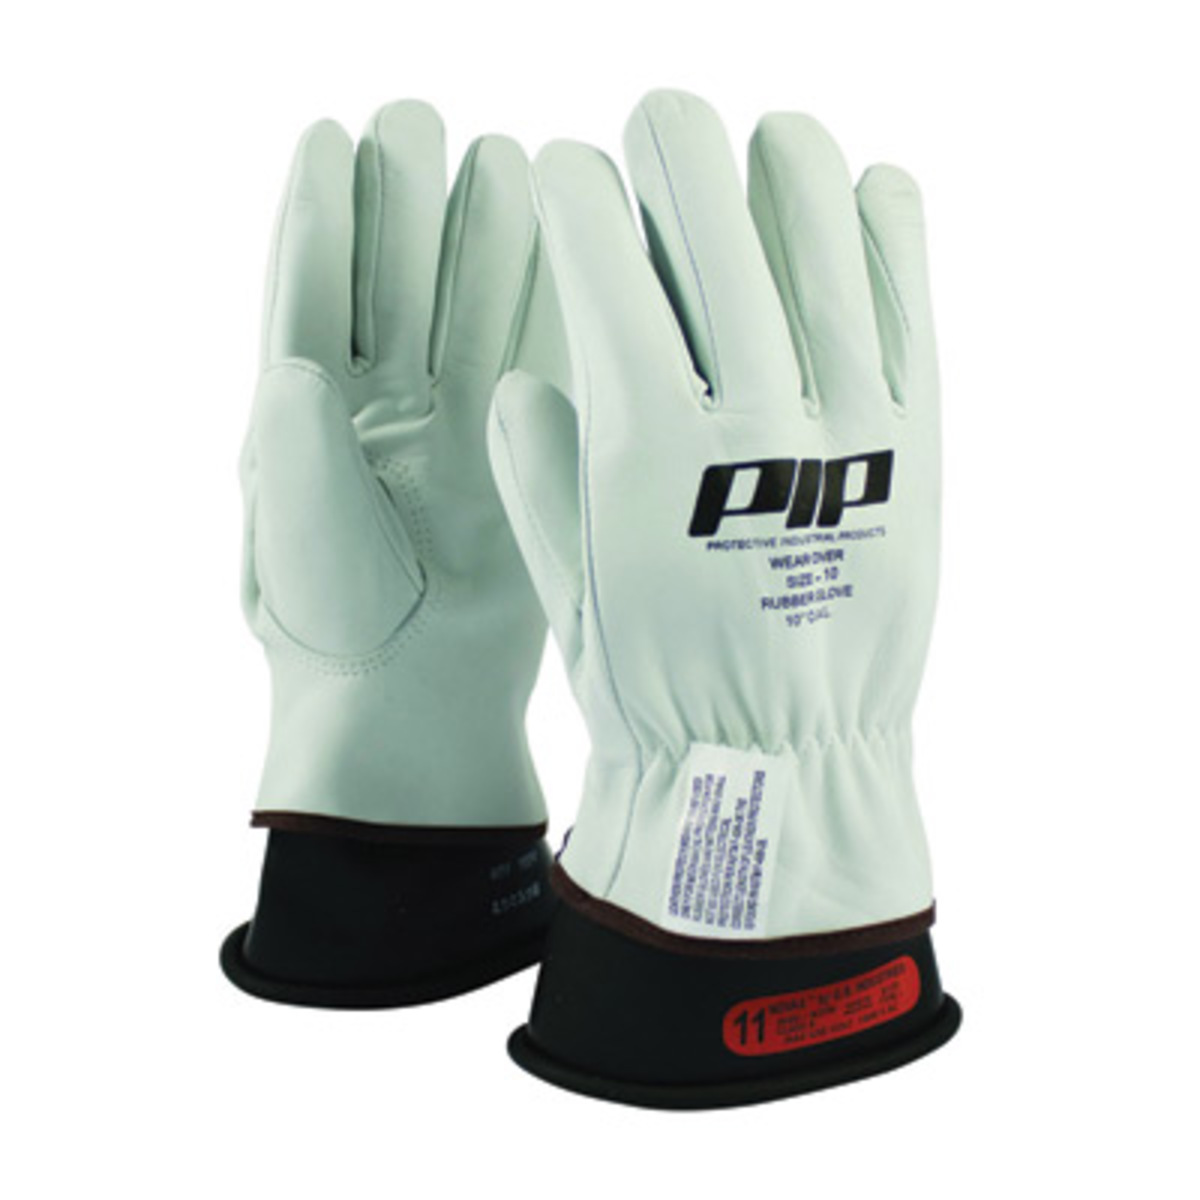 Salisbury Electrical Rubber Gloves Class 00 Low Voltage 11